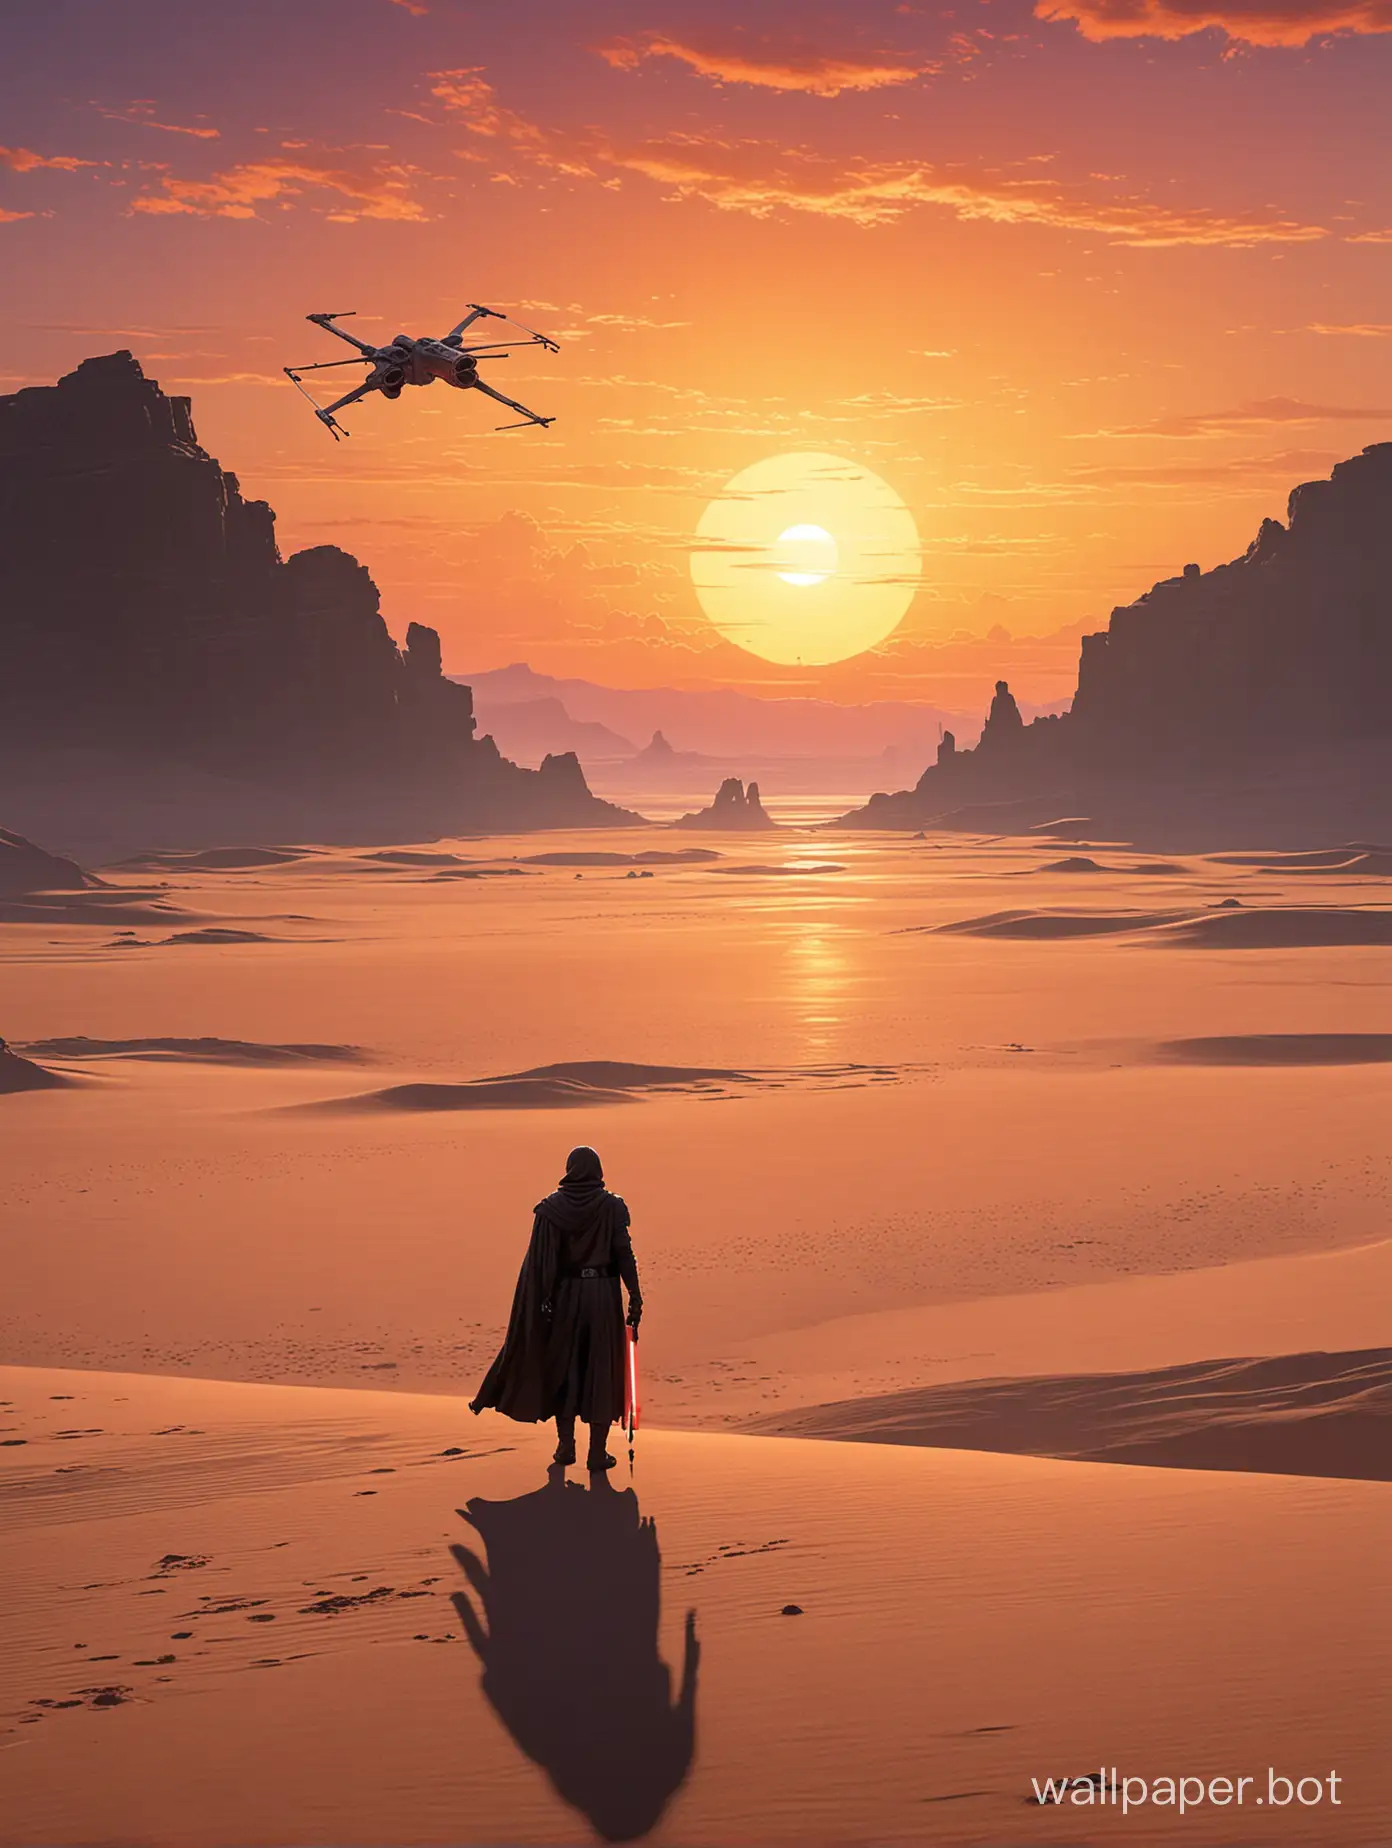 Imagine a breathtaking scene set on the iconic planet of Tatooine at sunset, with its two suns low on the horizon, casting a golden hue across the vast, sandy landscape. In the foreground, a silhouette of a lone Jedi stands atop a small dune, facing away from the viewer, looking towards the horizon. The Jedi's cloak billows in the gentle wind, and a lightsaber is held at their side, the blade retracted. Behind, the silhouette of a Star Wars X-wing fighter is parked, with its S-foils locked in the landing position, casting a long shadow that stretches towards the foreground. The sky is ablaze with orange, pink, and purple, reflecting off sparse, scattered clouds. In the distance, the outline of a small settlement can be glimpsed, with a few lights starting to twinkle as night approaches. The scene encapsulates a moment of calm and reflection, offering a glimpse into the vast and adventure-filled galaxy of Star Wars, inviting the viewer to imagine the stories that unfold in this faraway galaxy.